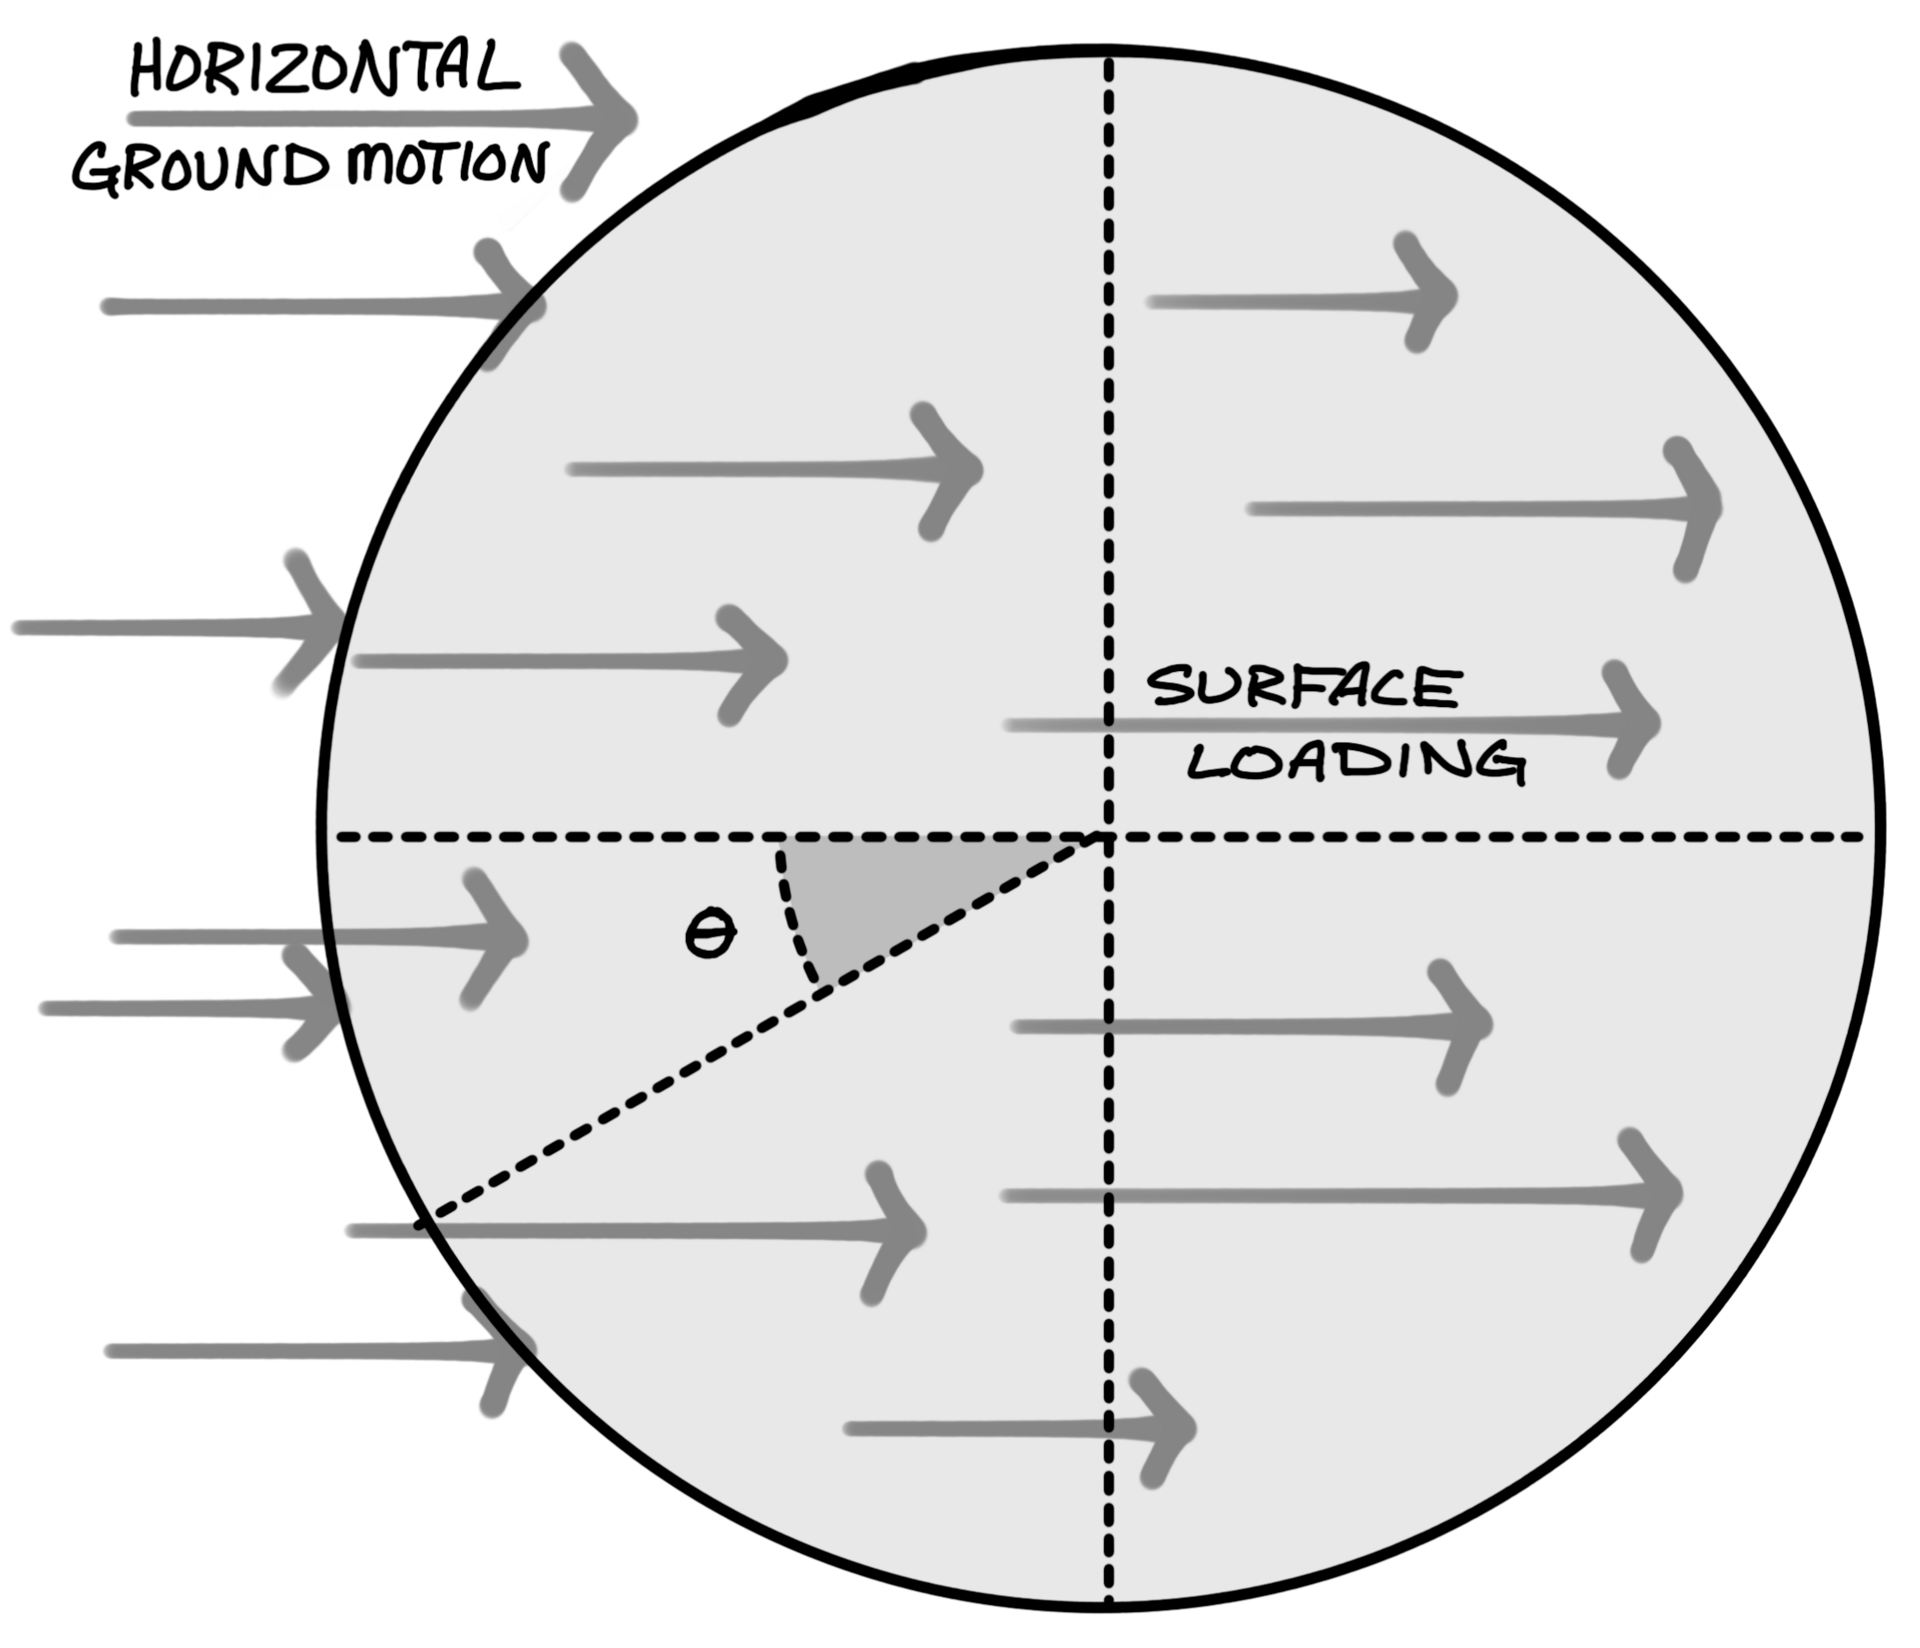 Plan diagram of earthquake forces distributed across a concrete dome shell.